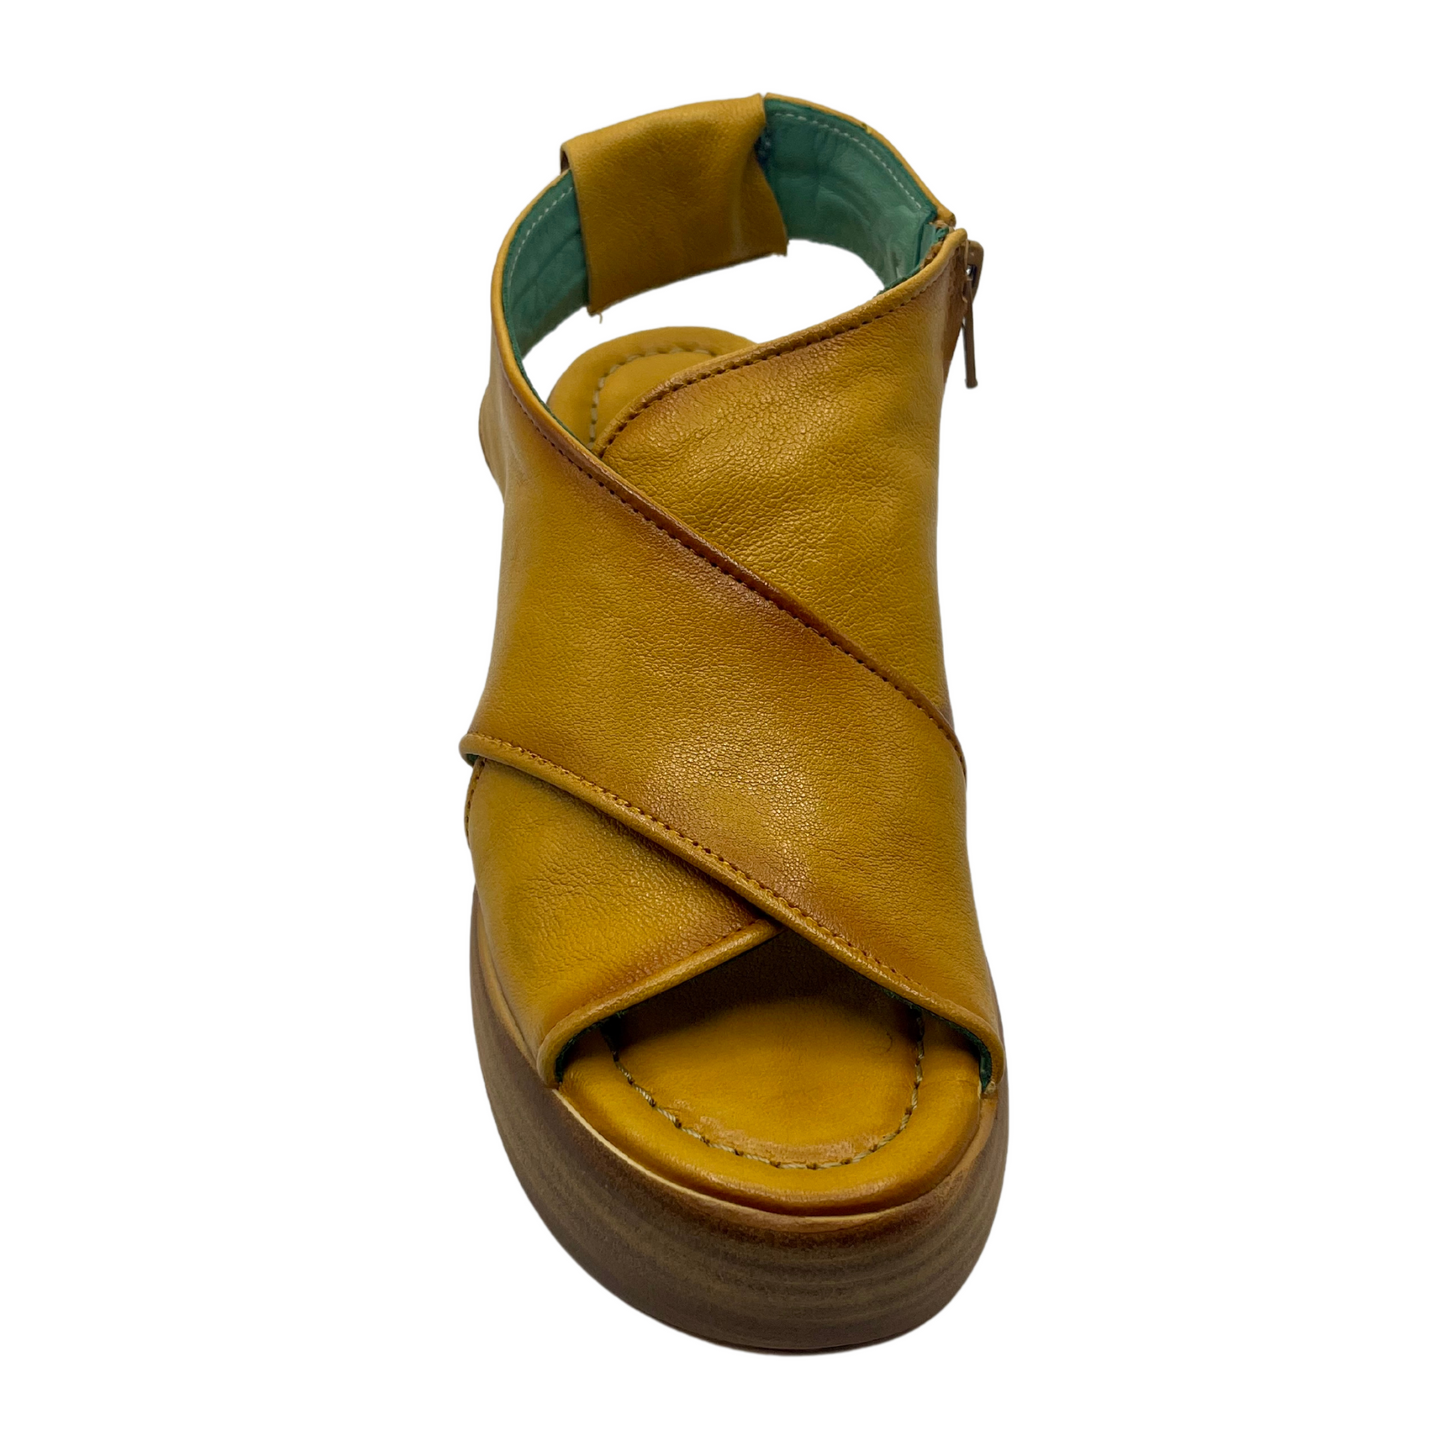 Top view of mustard coloured leather sandals with chunky wedge sole and sling back strap